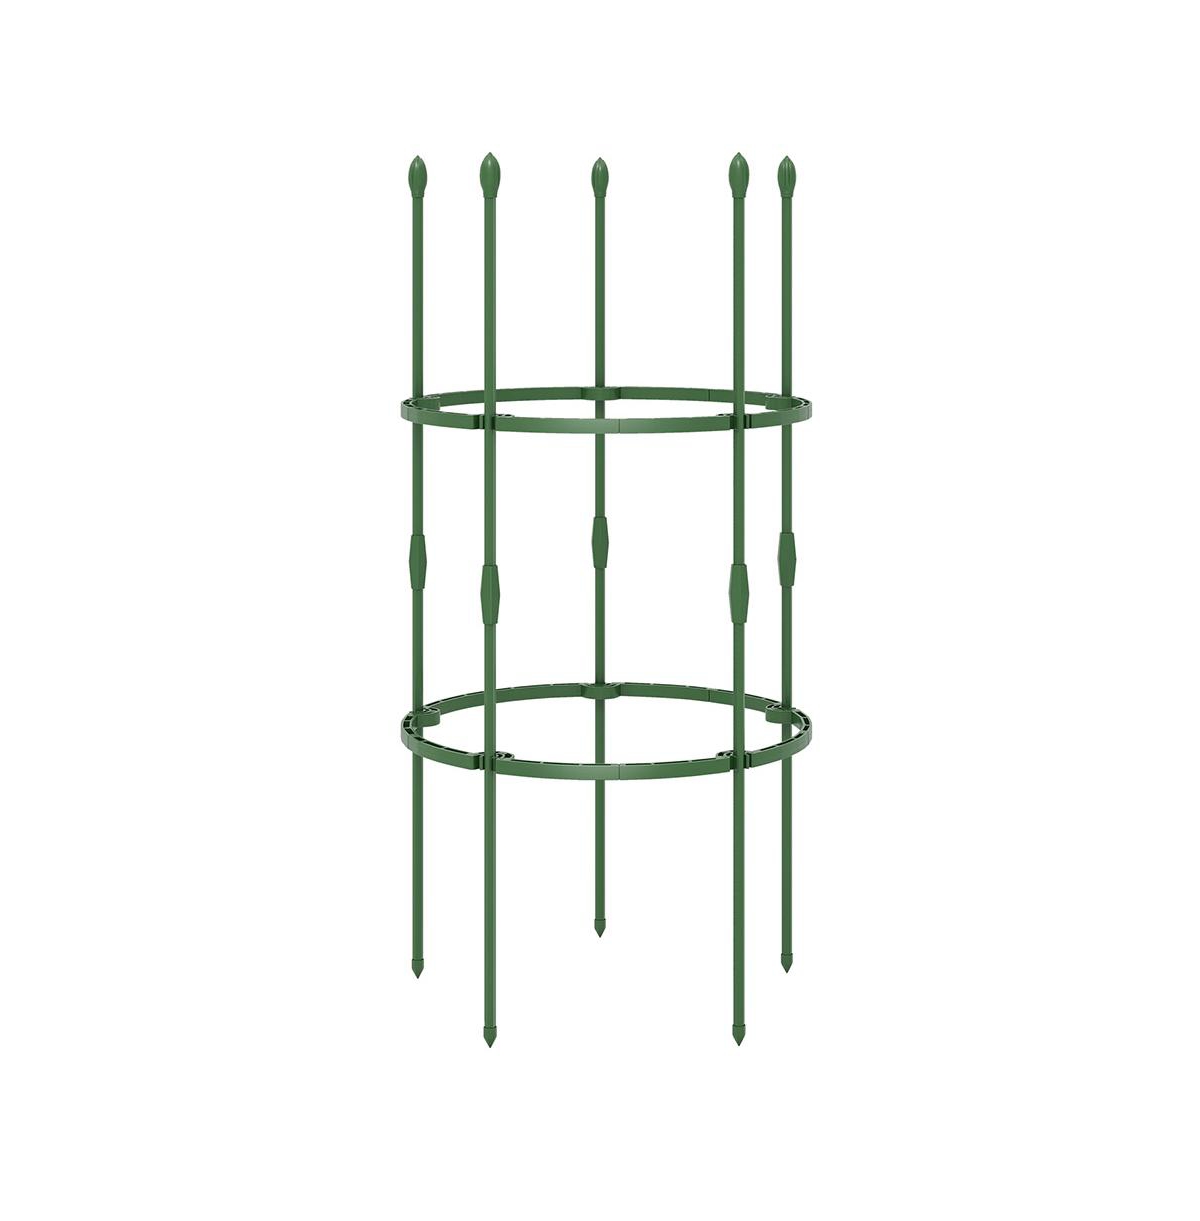 3-Pack Garden Trellis 40" Tall Plant Support Stands with Clips and Ties-s - Green